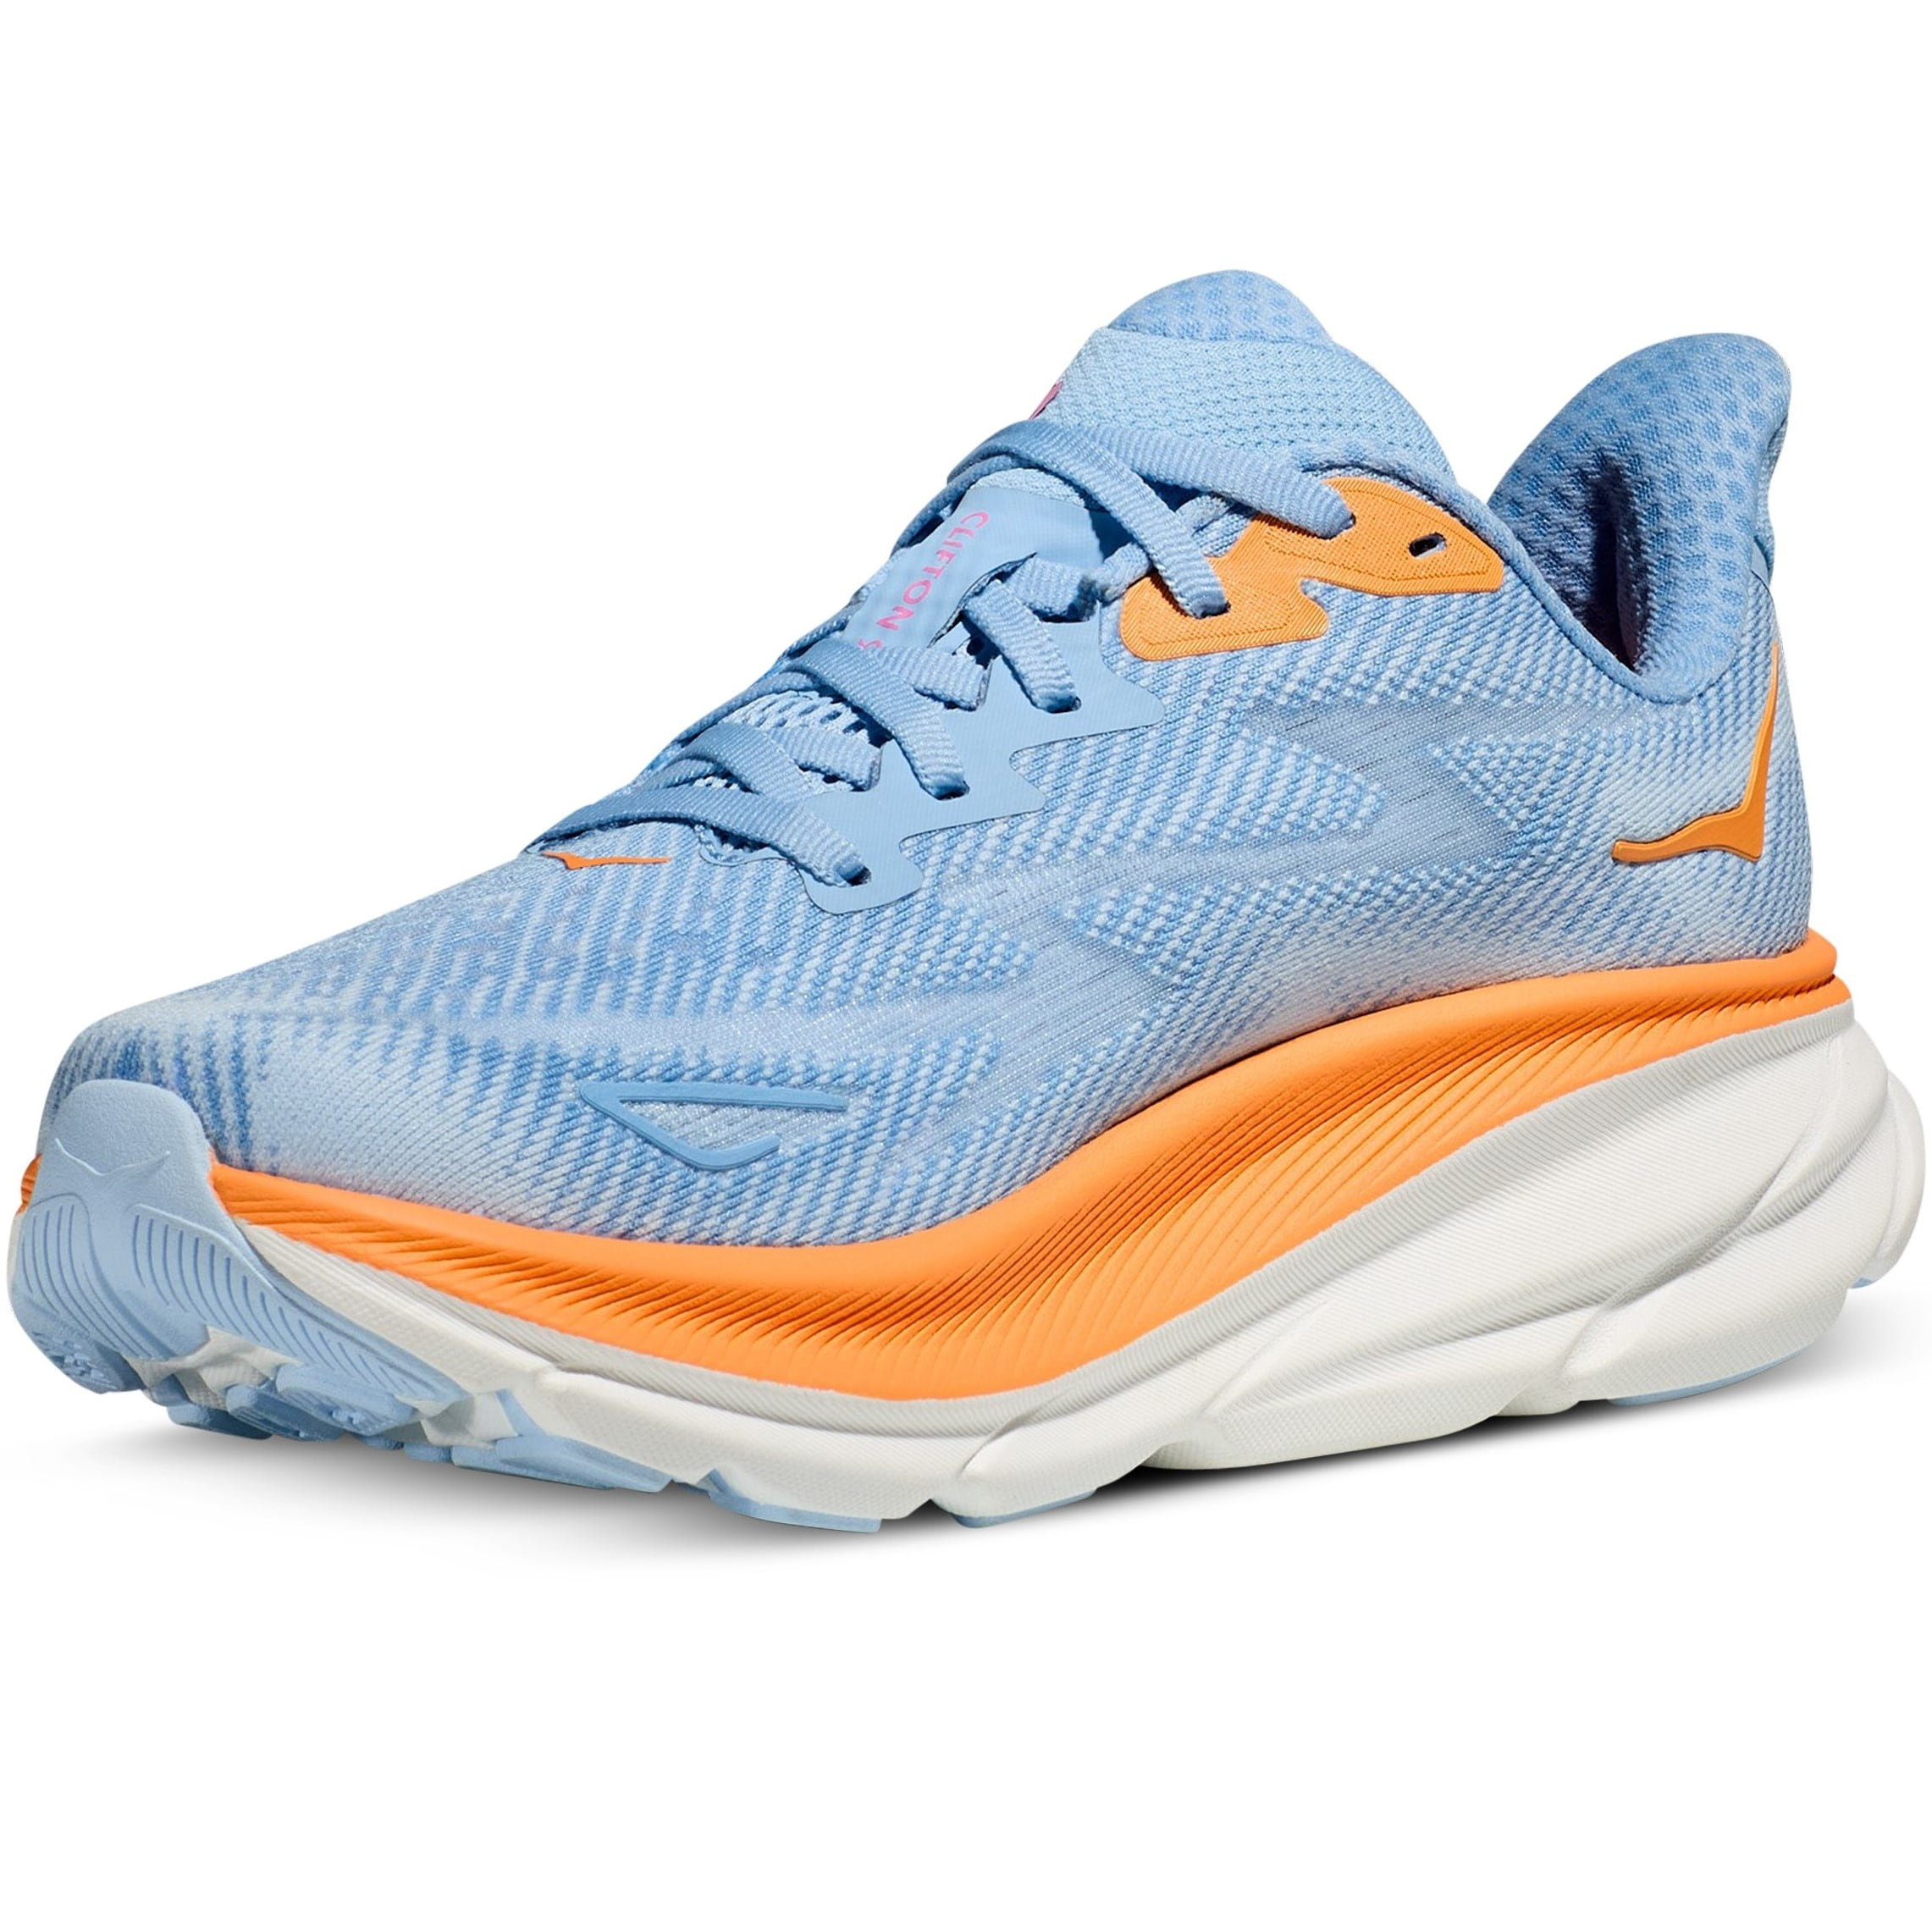 GIÀY HOKA NỮ CLIFTON 9 AIRY BLUE ICE WATER WOMEN ROAD RUNNING SHOES 1127896-ABIW 1